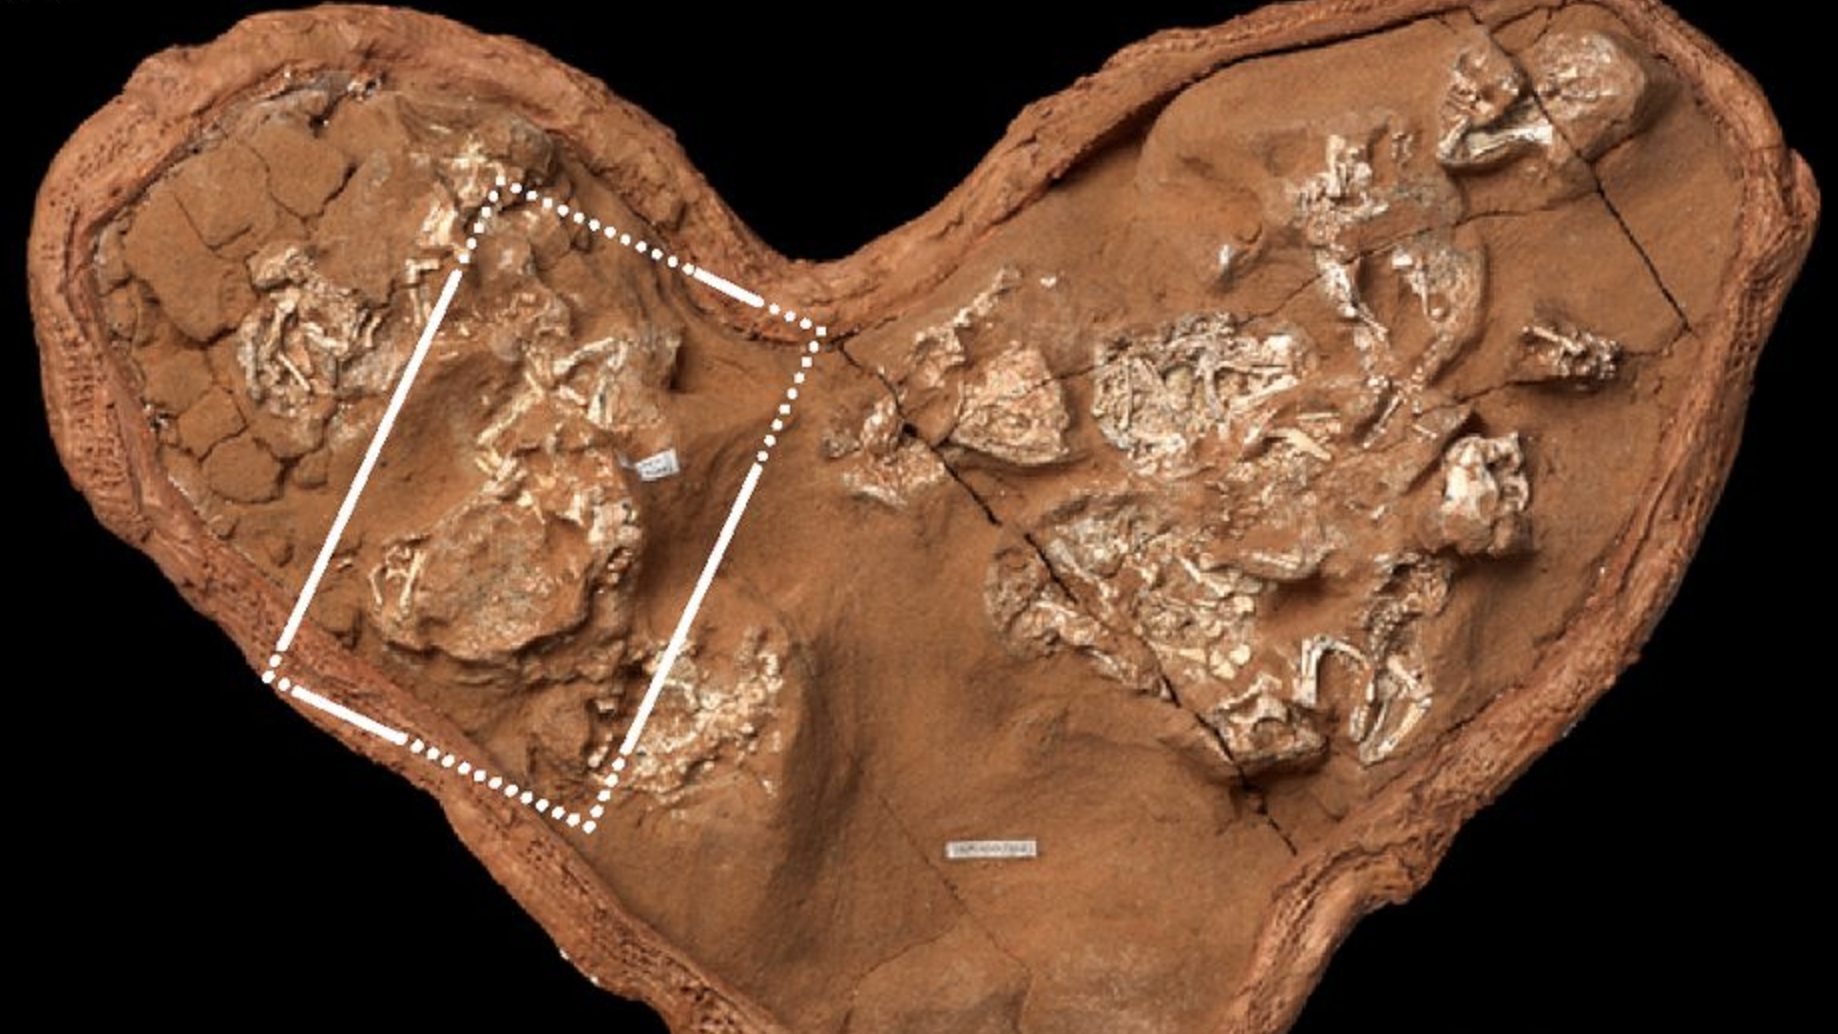 New Dino Research Complicates Previous Beliefs